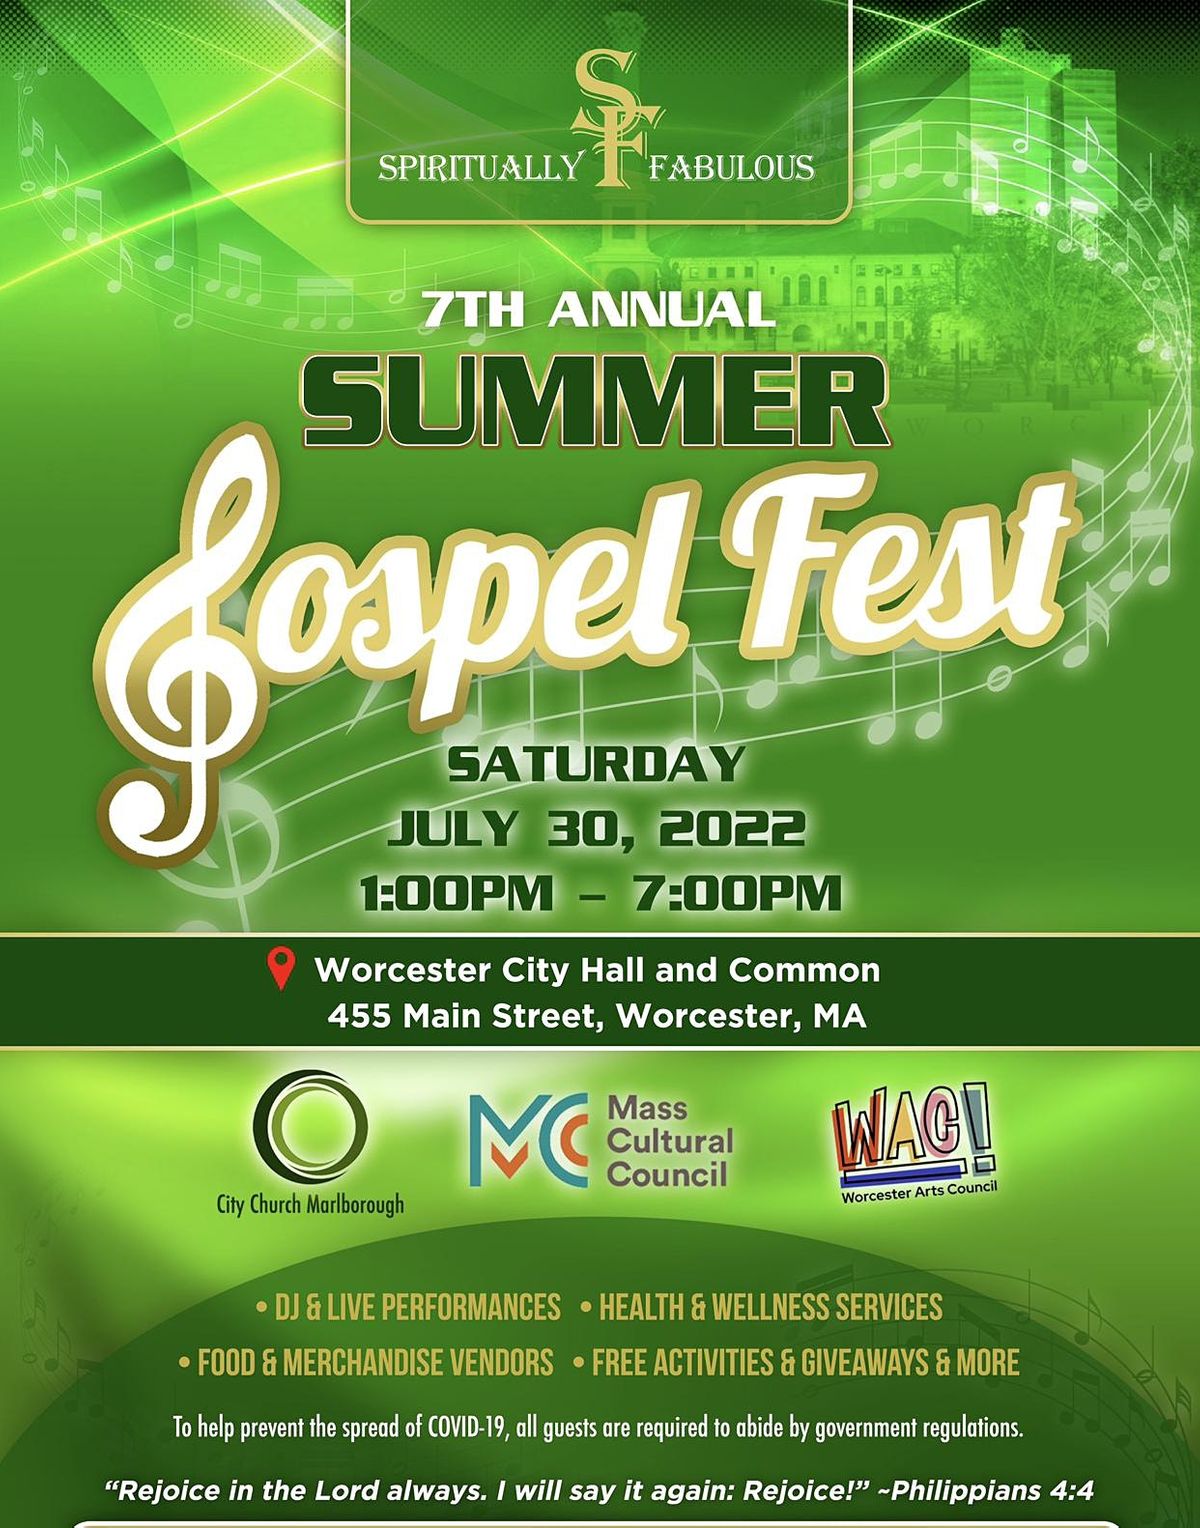 7th Annual Summer Gospel Fest, Worcester City Hall Common, 30 July 2022